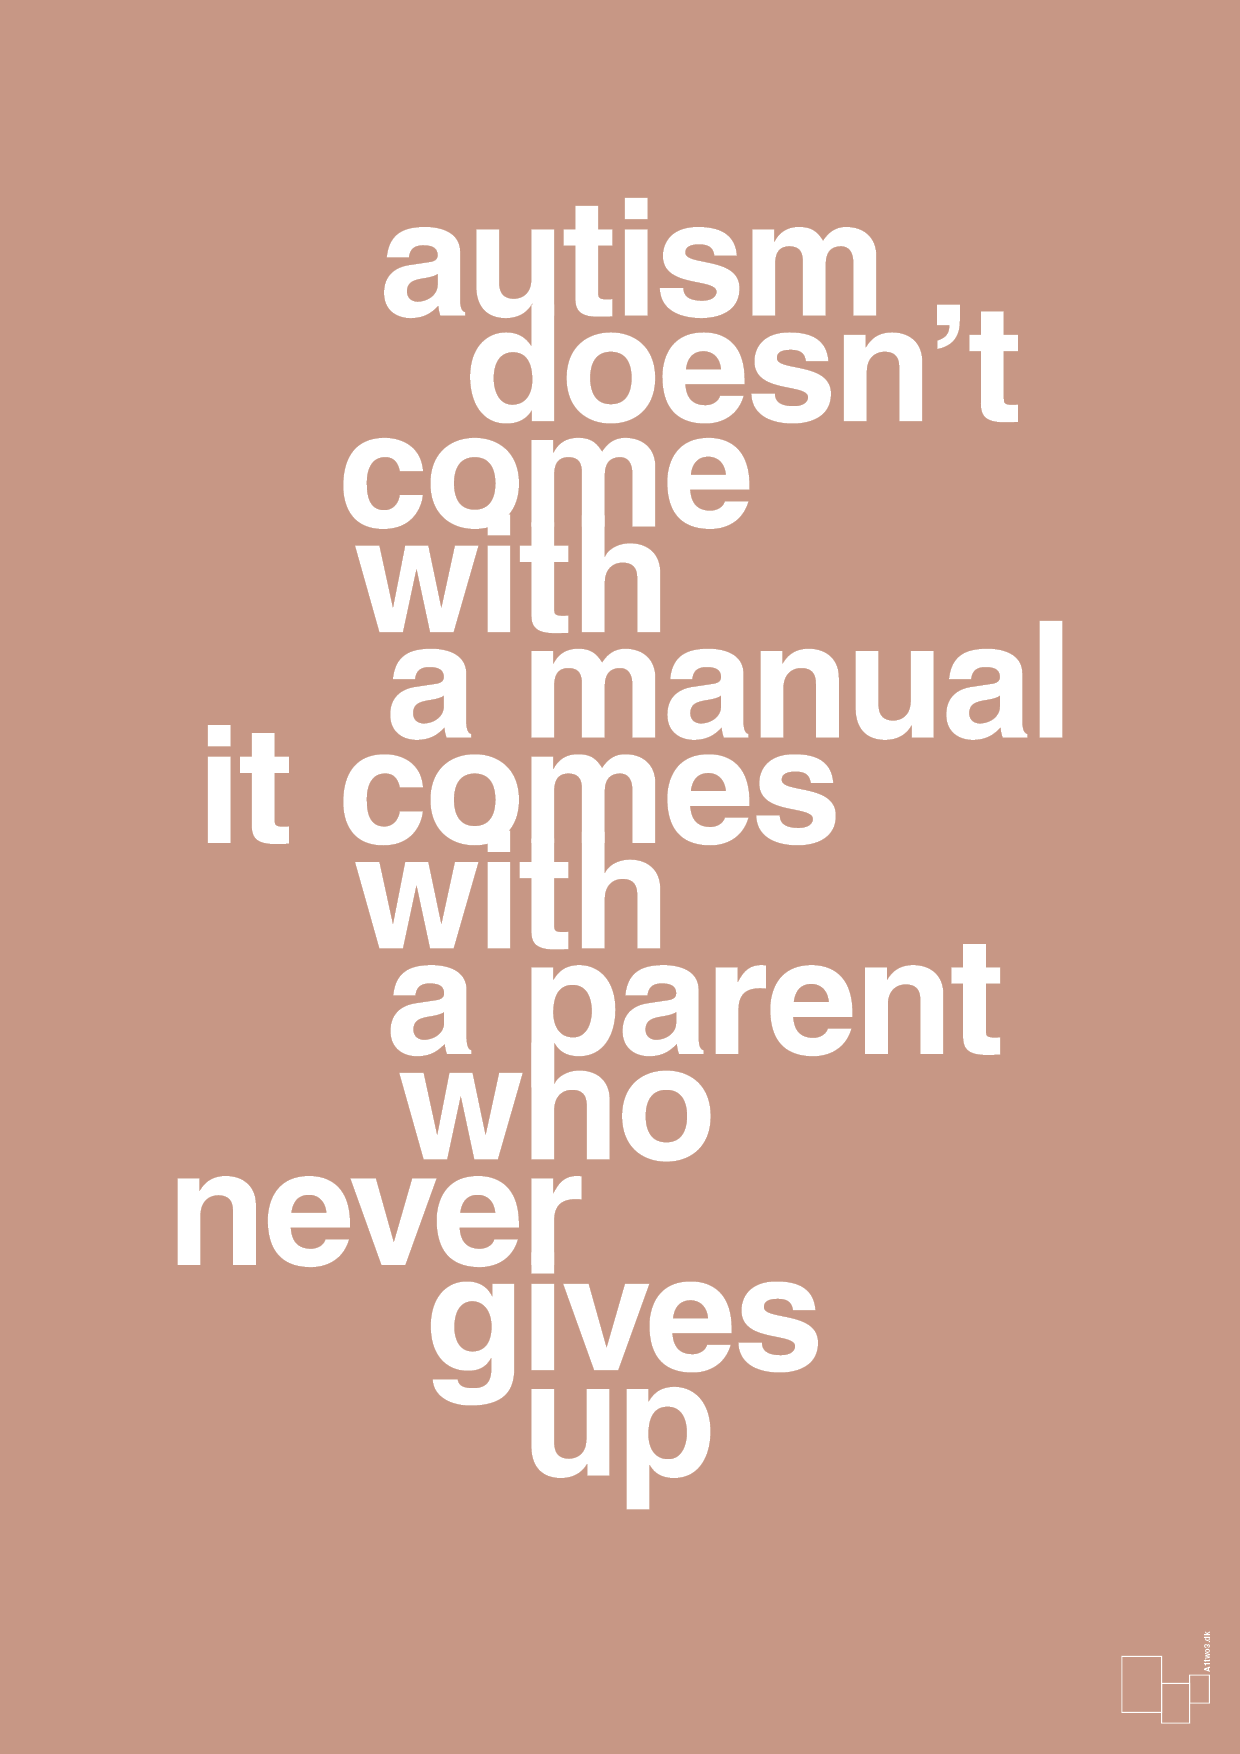 autism doesnt come with a manual it comes with a parent who never gives up - Plakat med Samfund i Powder